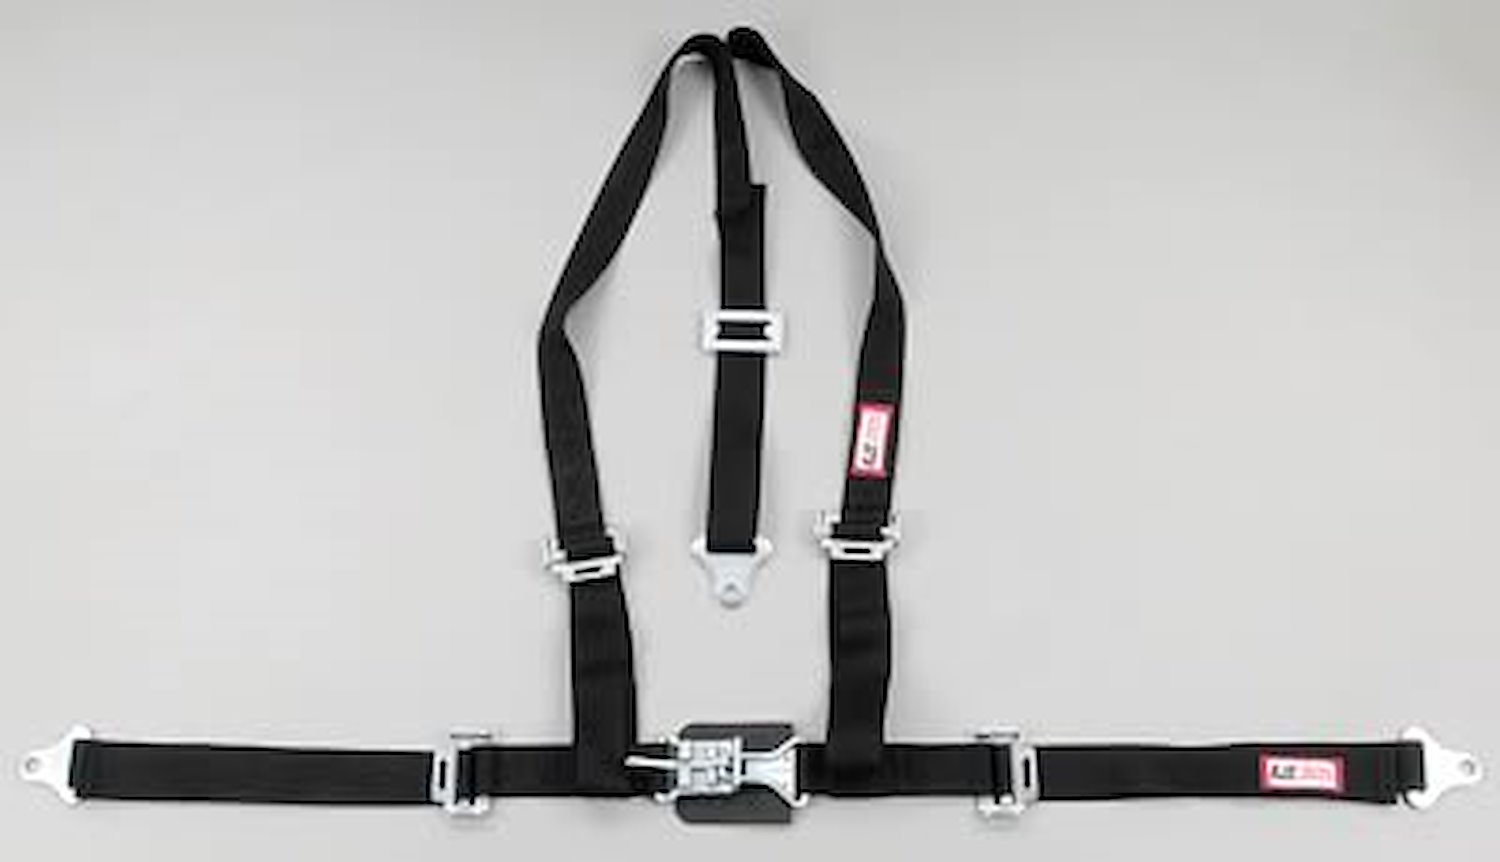 NON-SFI L&L HARNESS 3 PULL UP Lap Belt SNAP SEWN IN 2 S.H. Individual ROLL BAR Mount WRAP/SNAP BLACK